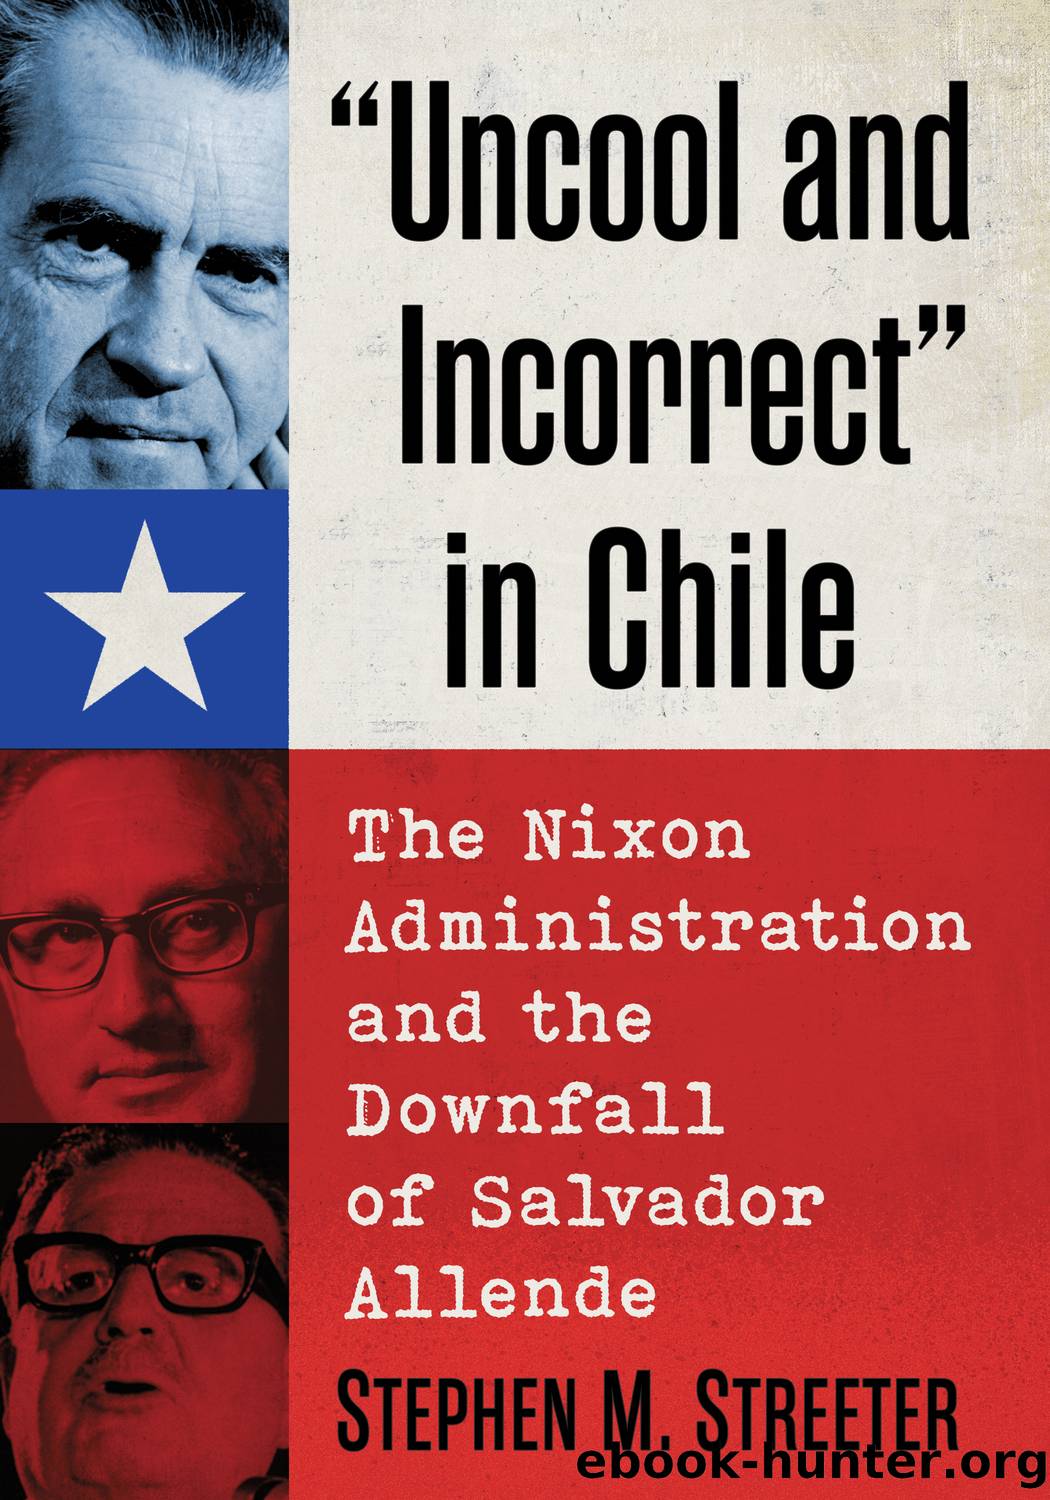 Uncool and Incorrect" in Chile by Stephen M. Streeter;